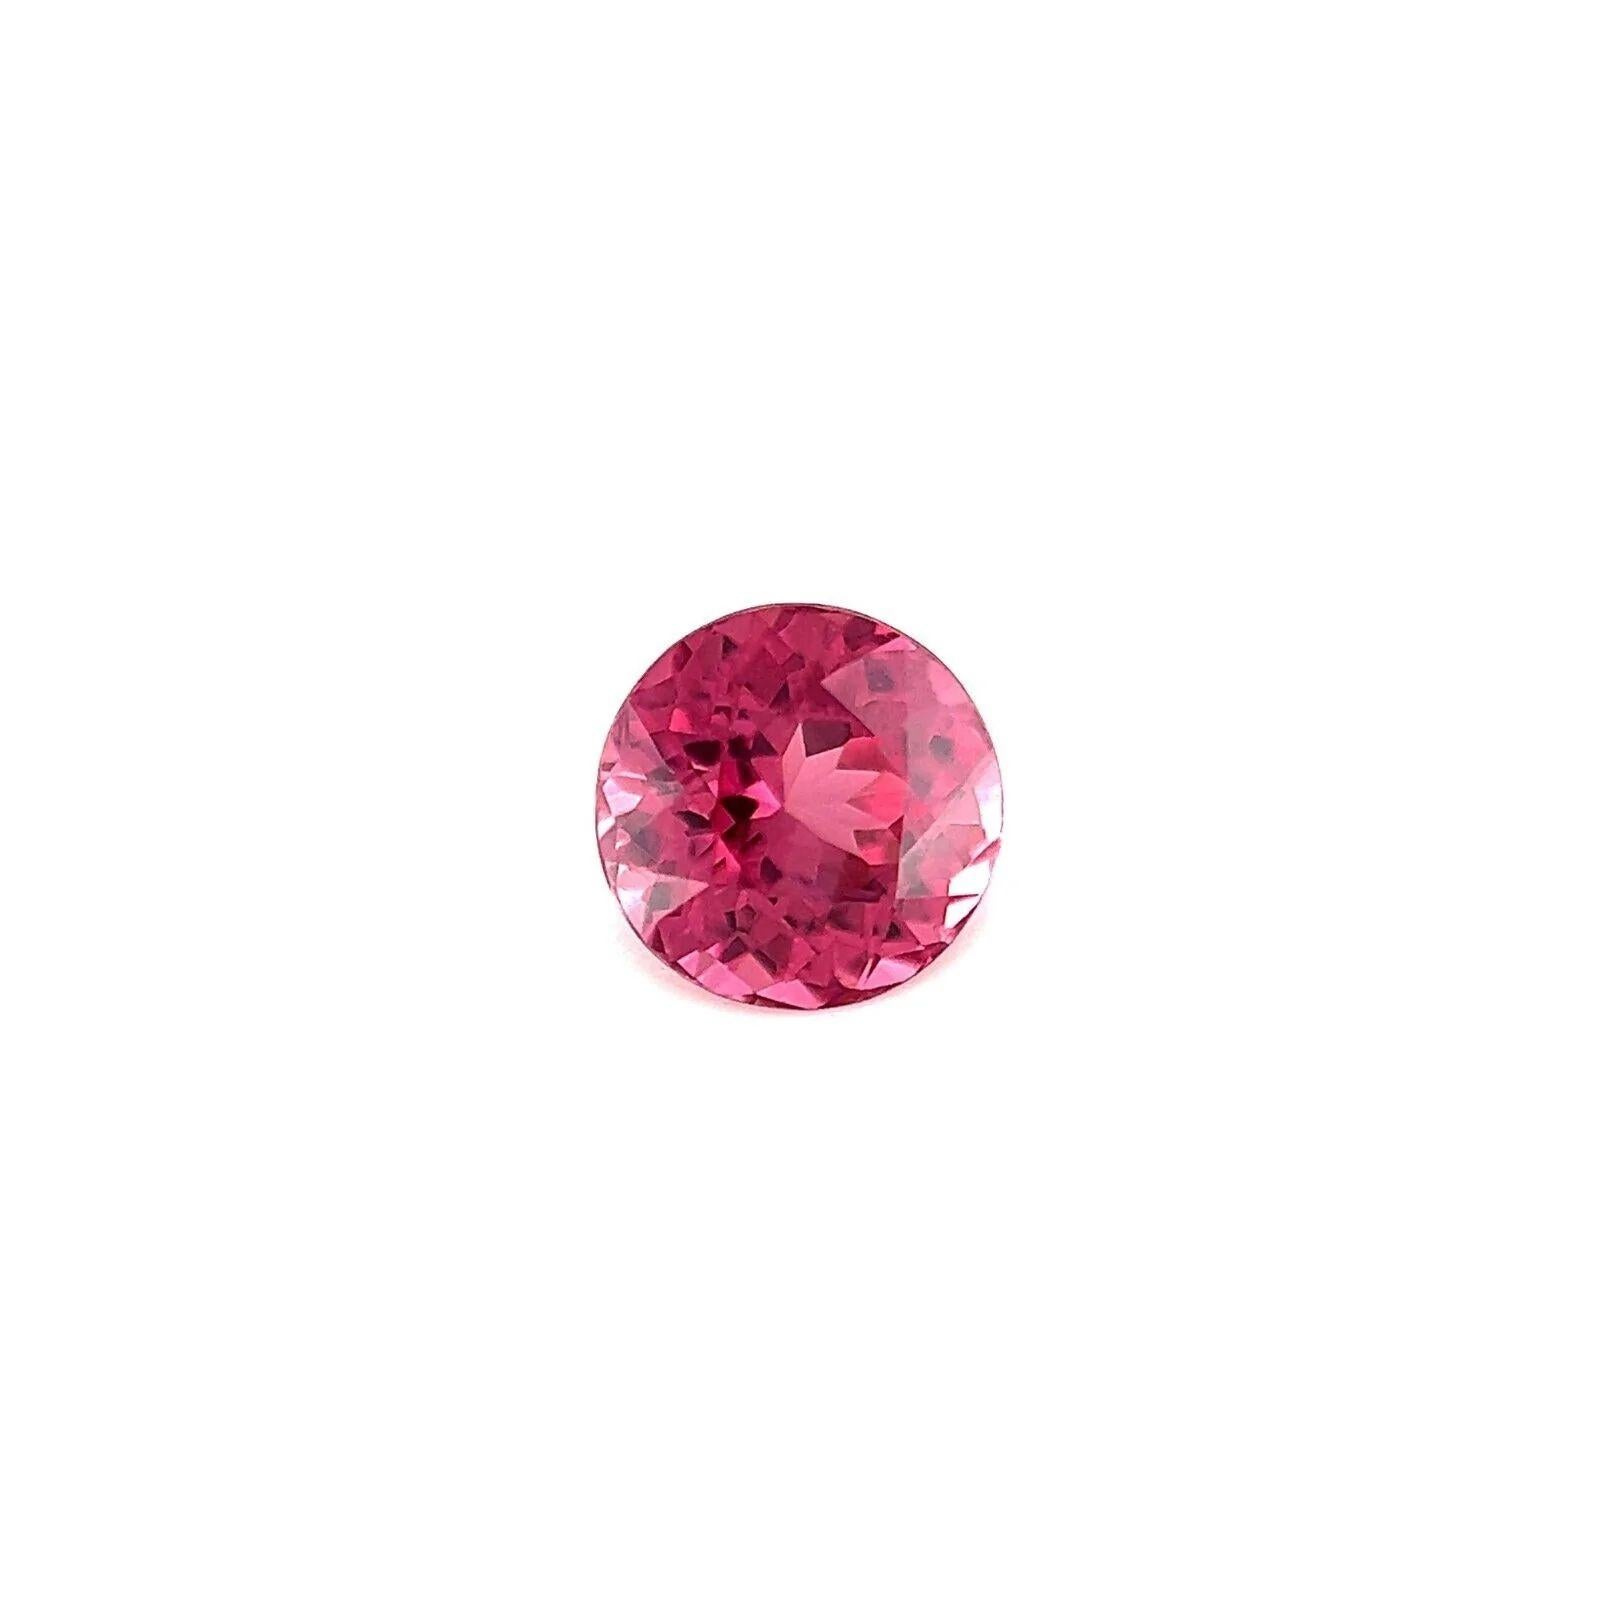 1.11ct Vivid Purple Pink Rhodolite Garnet Round Brilliant Cut Gemstone 6mm VS

Natural Vivid Pink Purple Rhodolite Garnet Gem.
1.11 carat with a beautiful vivid purplish pink colour and very good clarity, a very clean gem, VS.
Also has an excellent